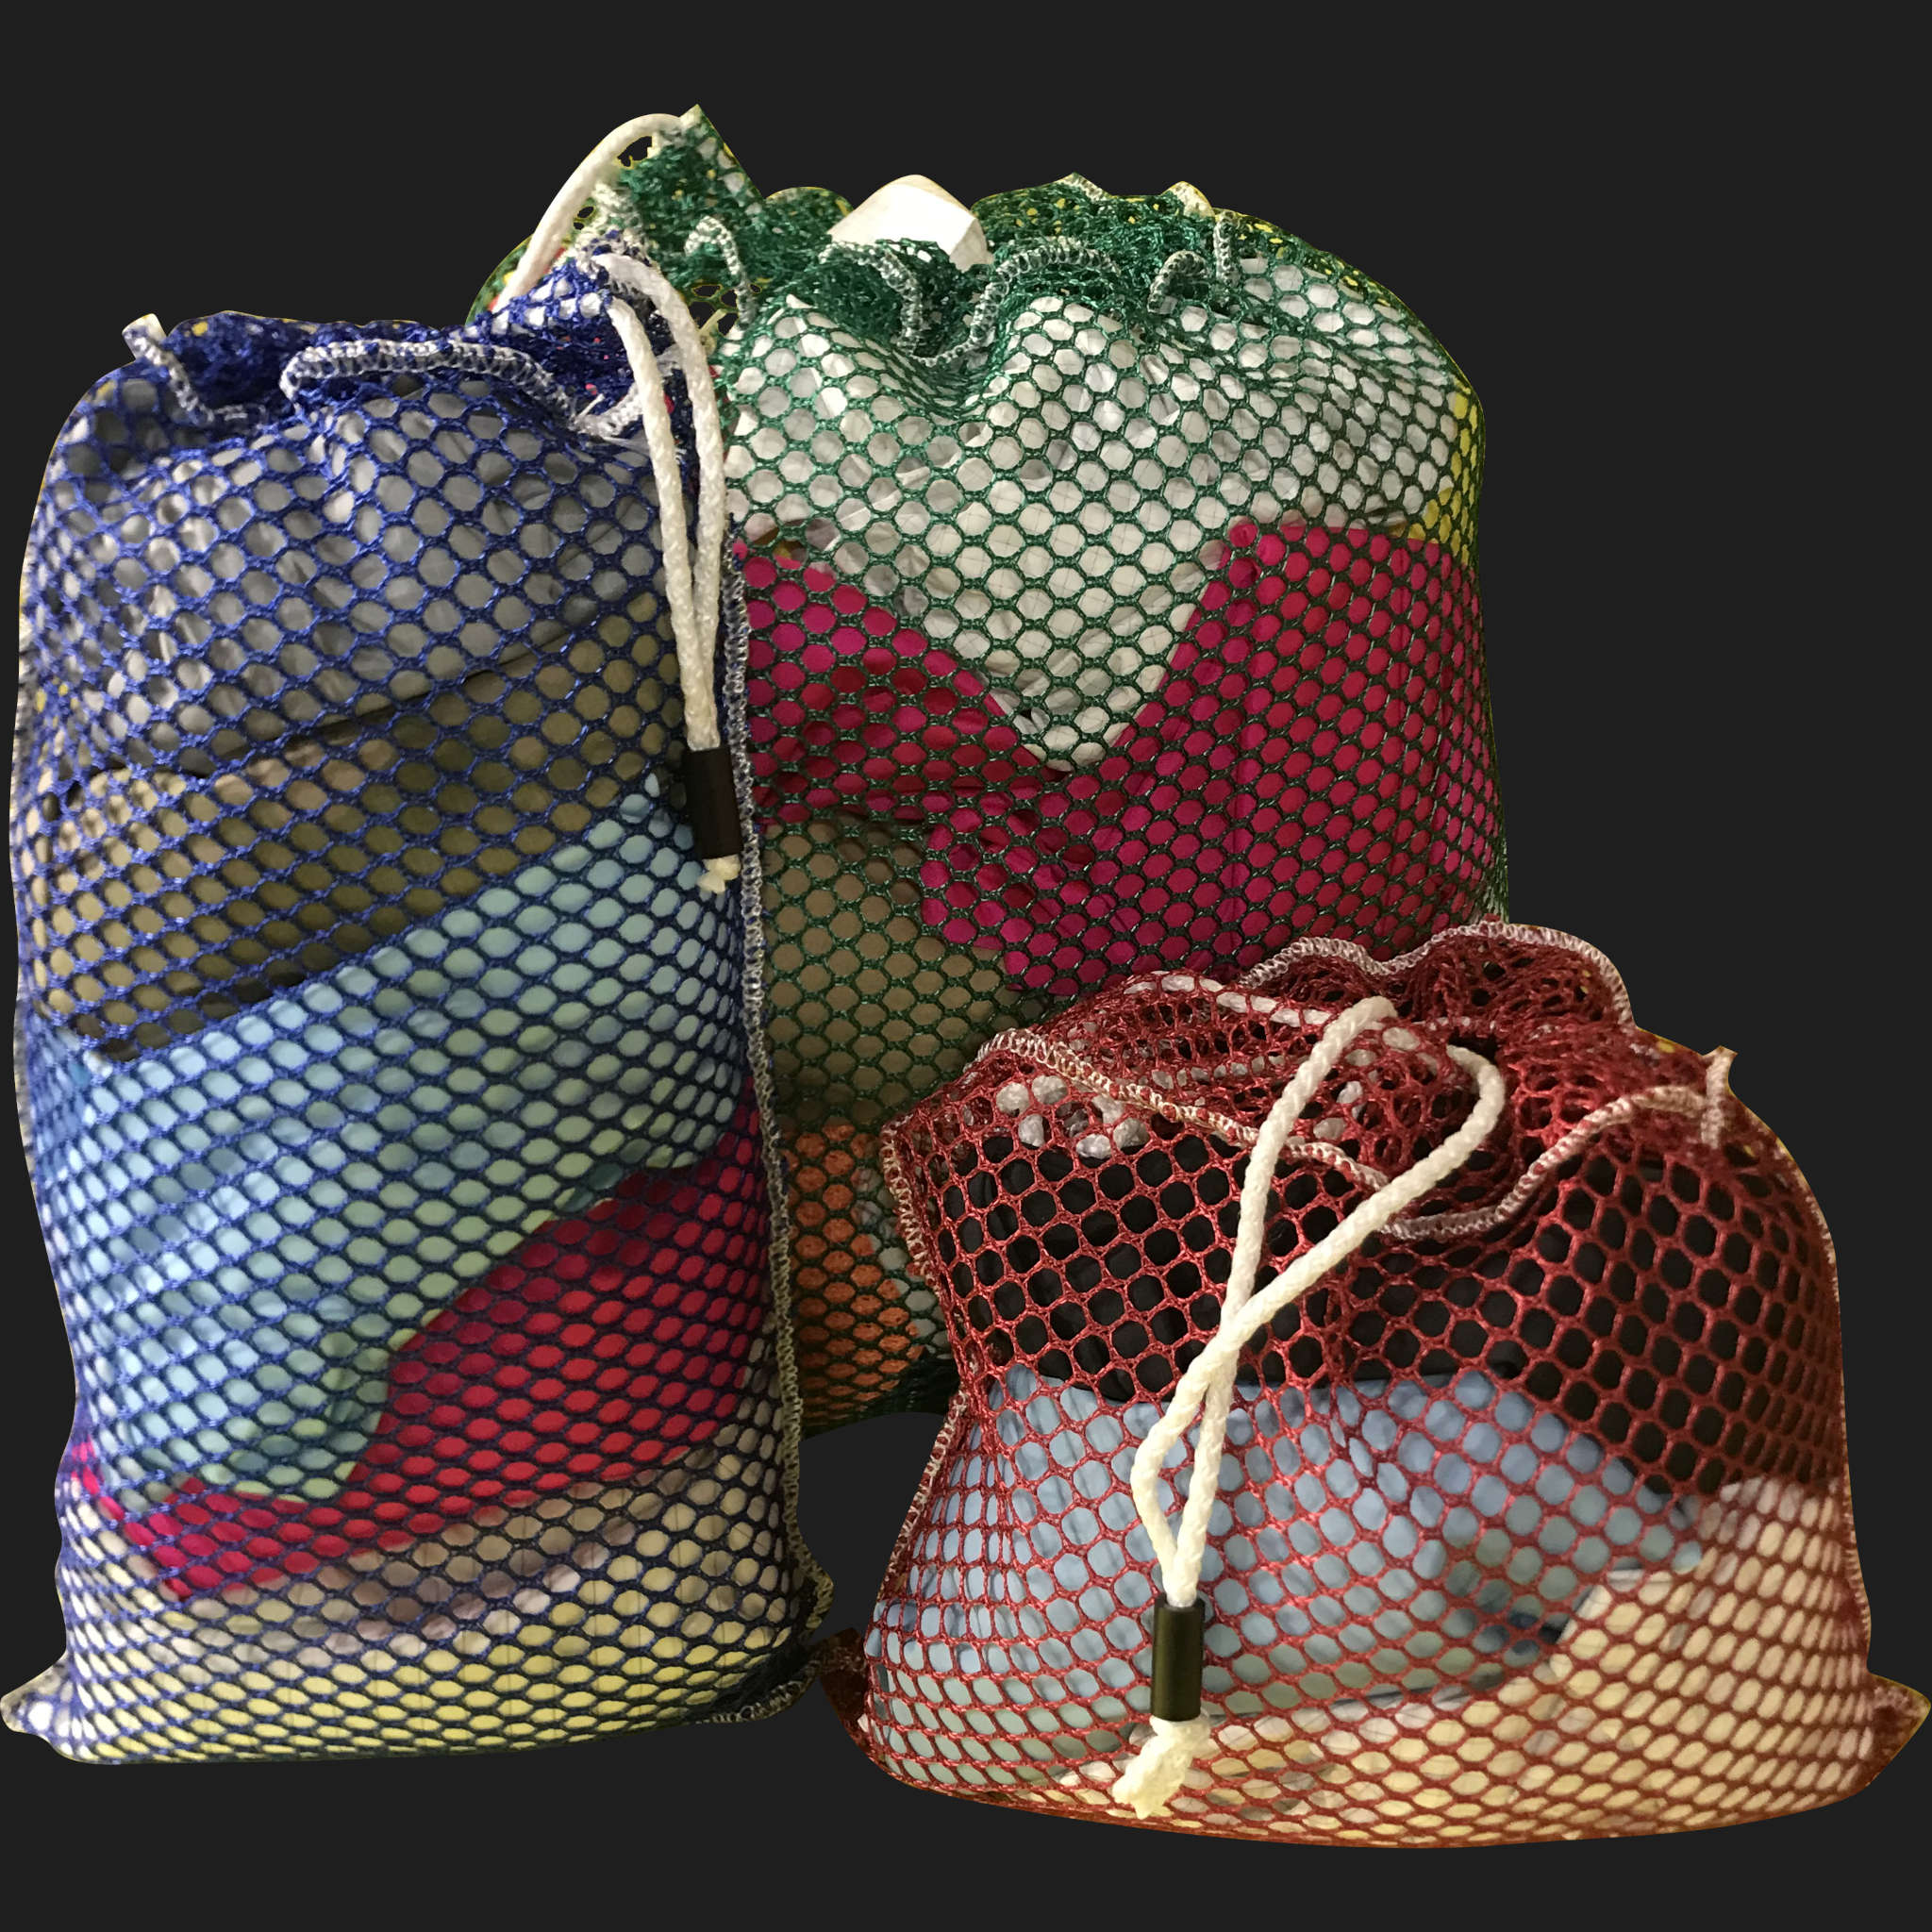 40" x 48" Customized Mesh-Net-Laundry Bags Heavy Duty with Cord and barrellock closure